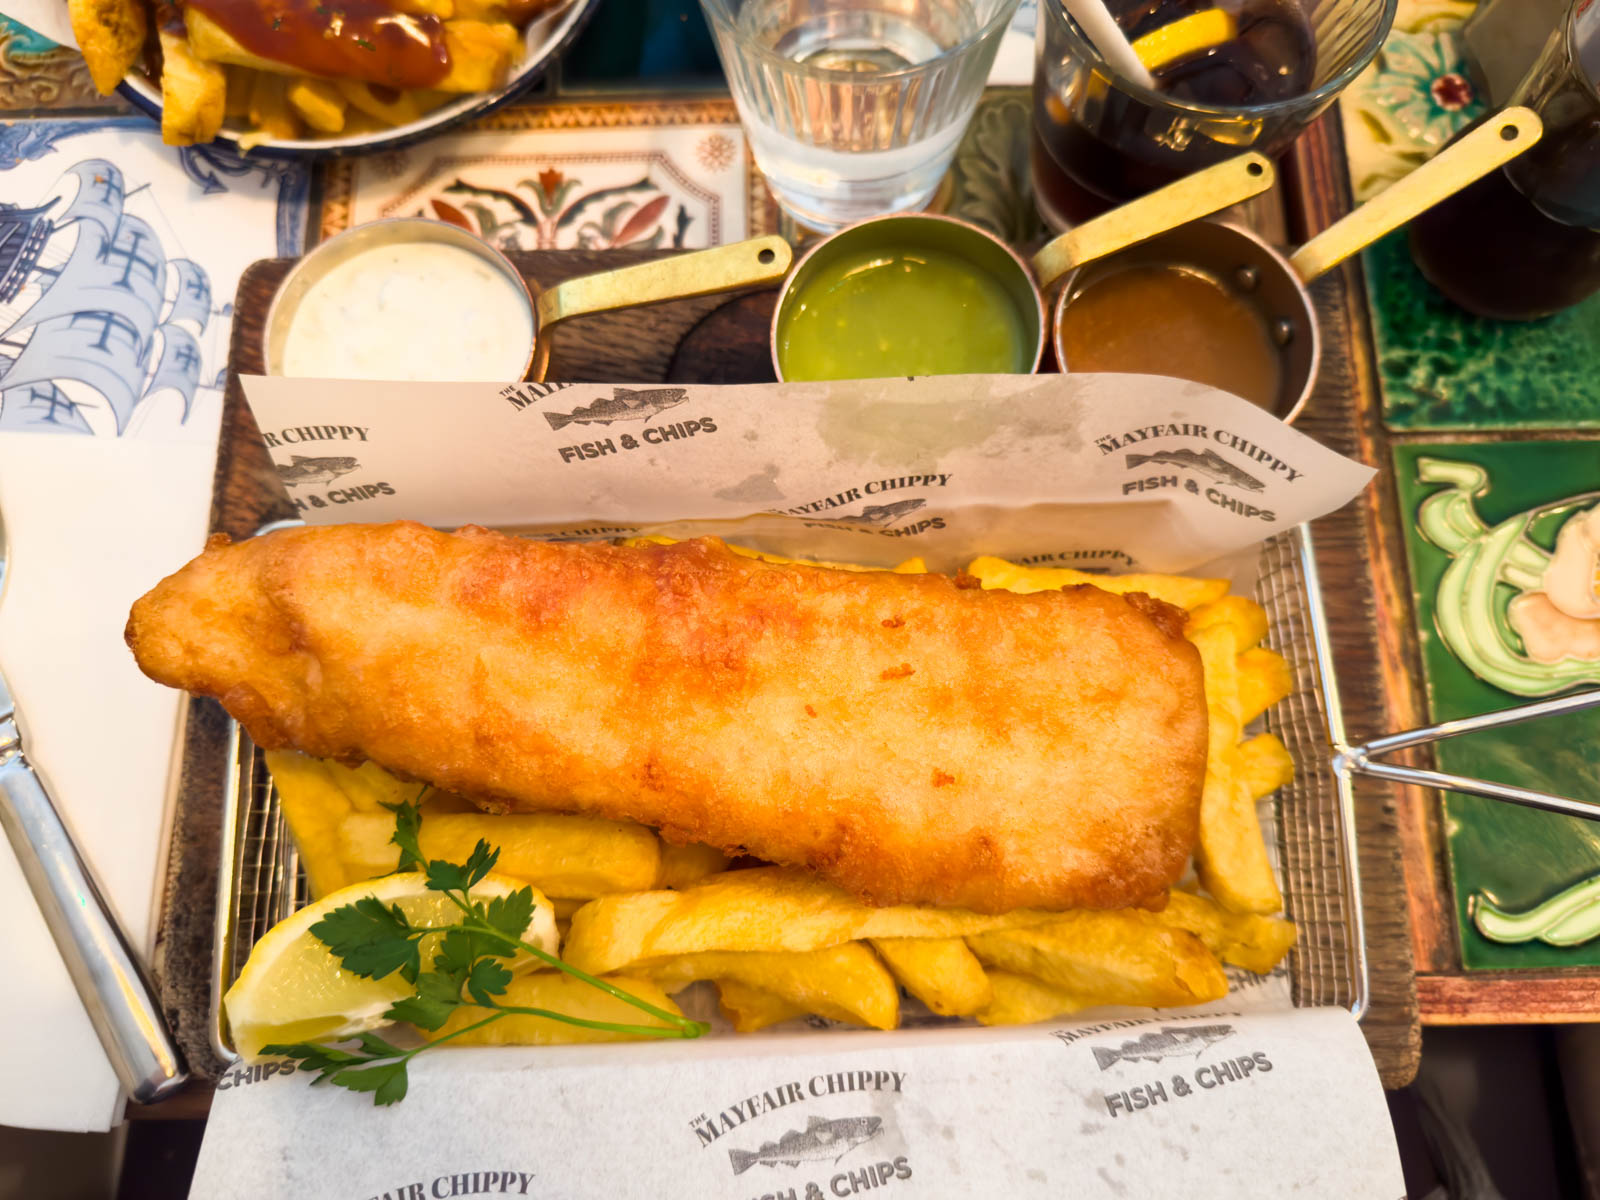 A fried haddock sits on a bed of french fries.